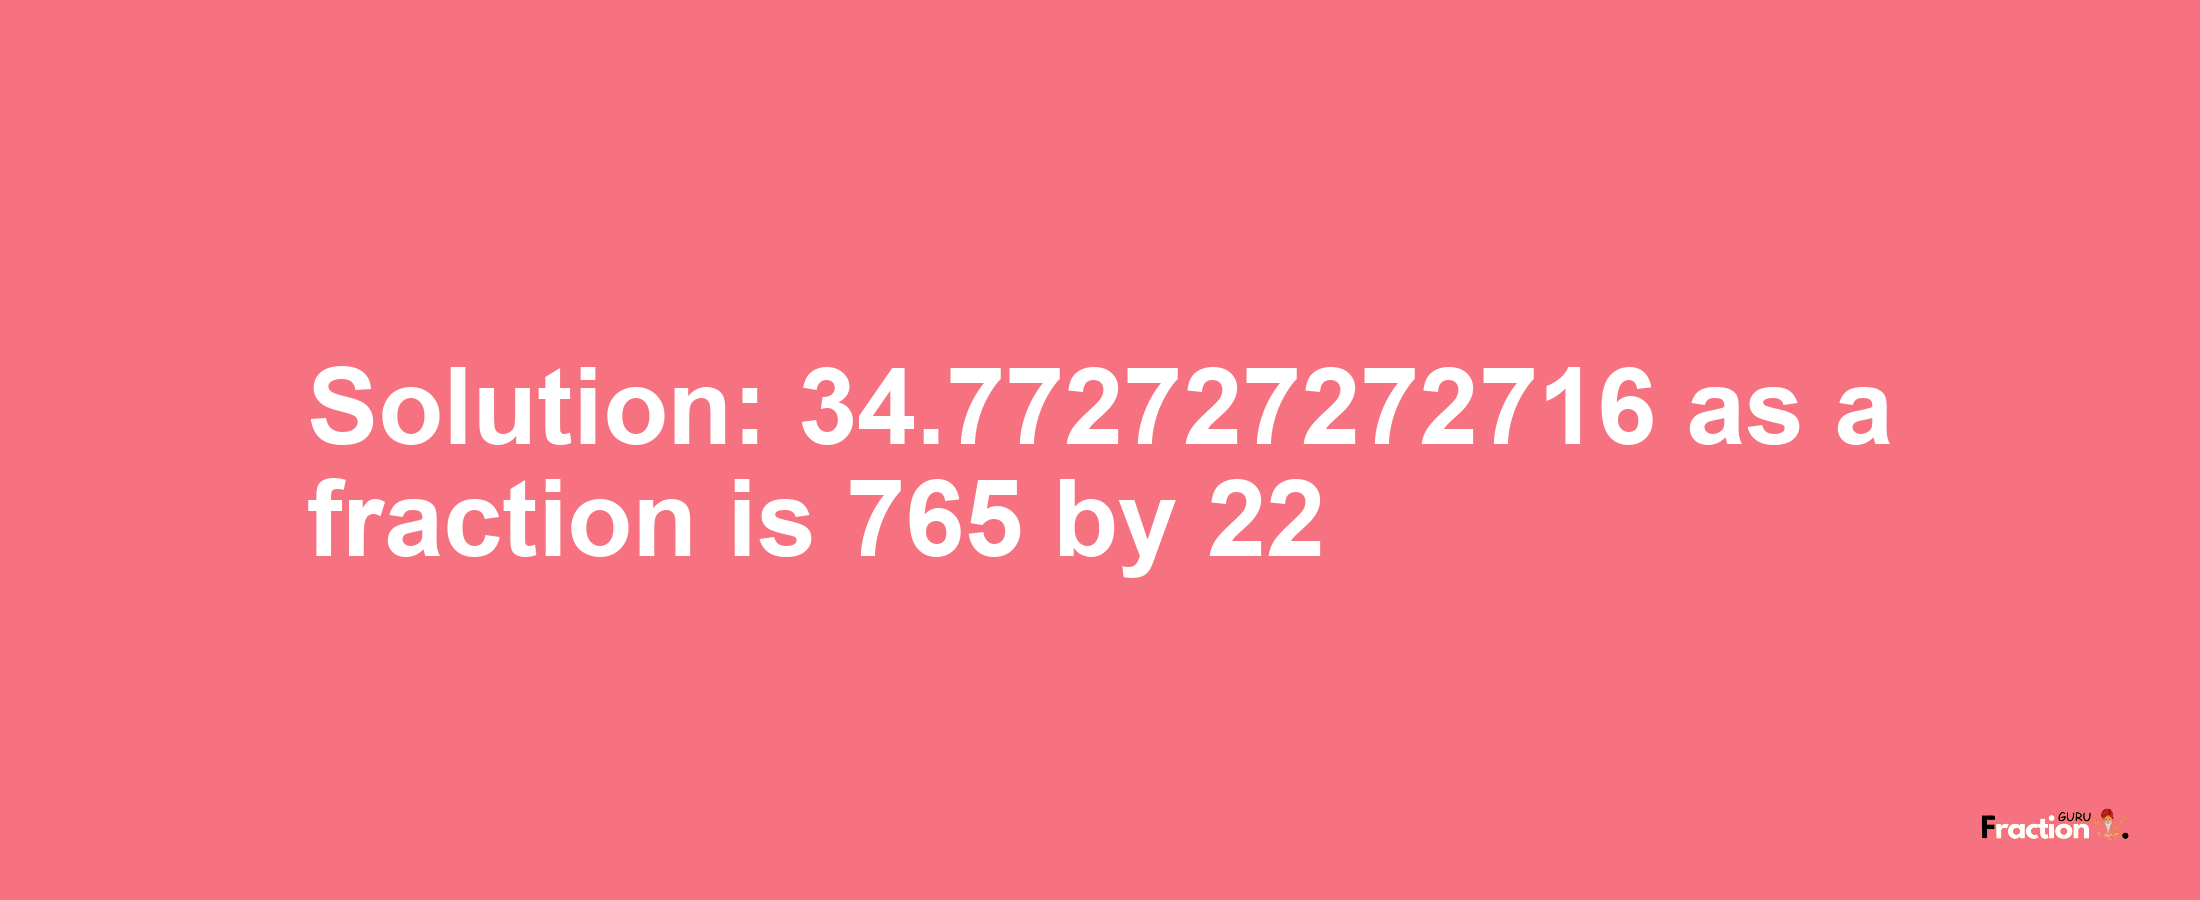 Solution:34.772727272716 as a fraction is 765/22